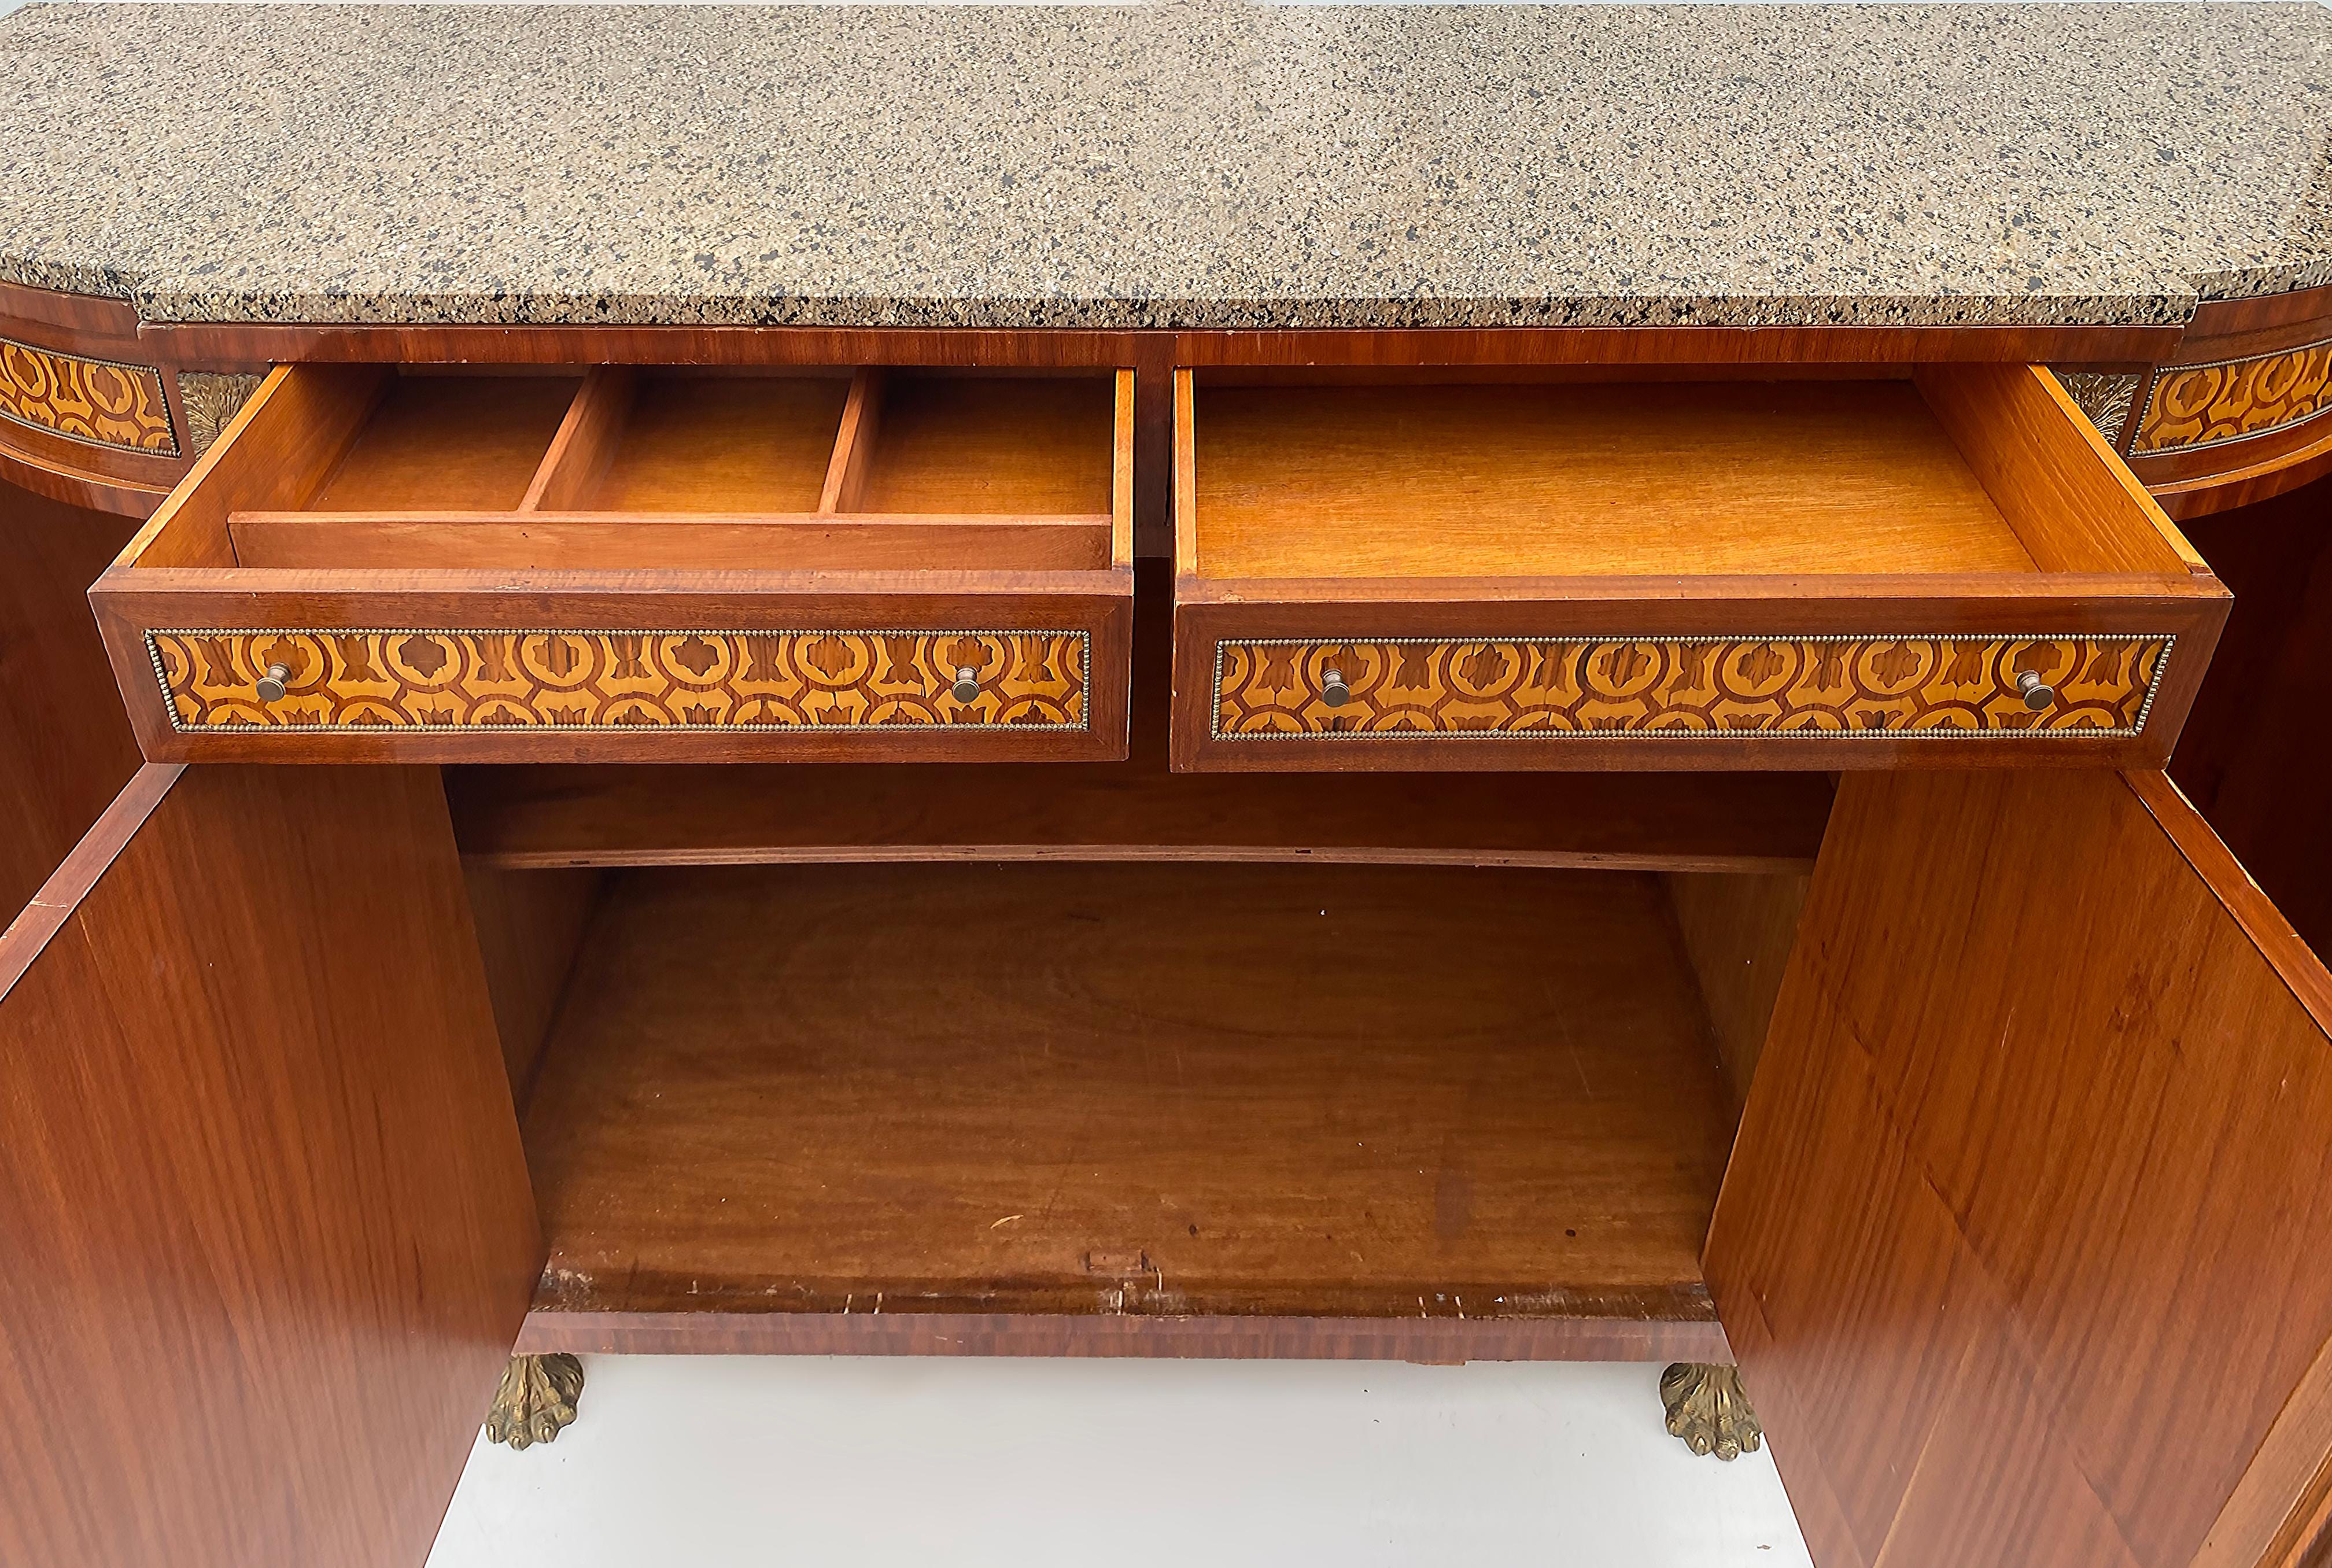 Marquetry Sideboard French, Granite, Inlay, Bronze Mounts and Feet

Offered for sale is a large 20th-century French design sideboard/credenza with marquetry inlays, gilt metal hardware, hairy claw feet, and a thick granite top.  This is an elegant